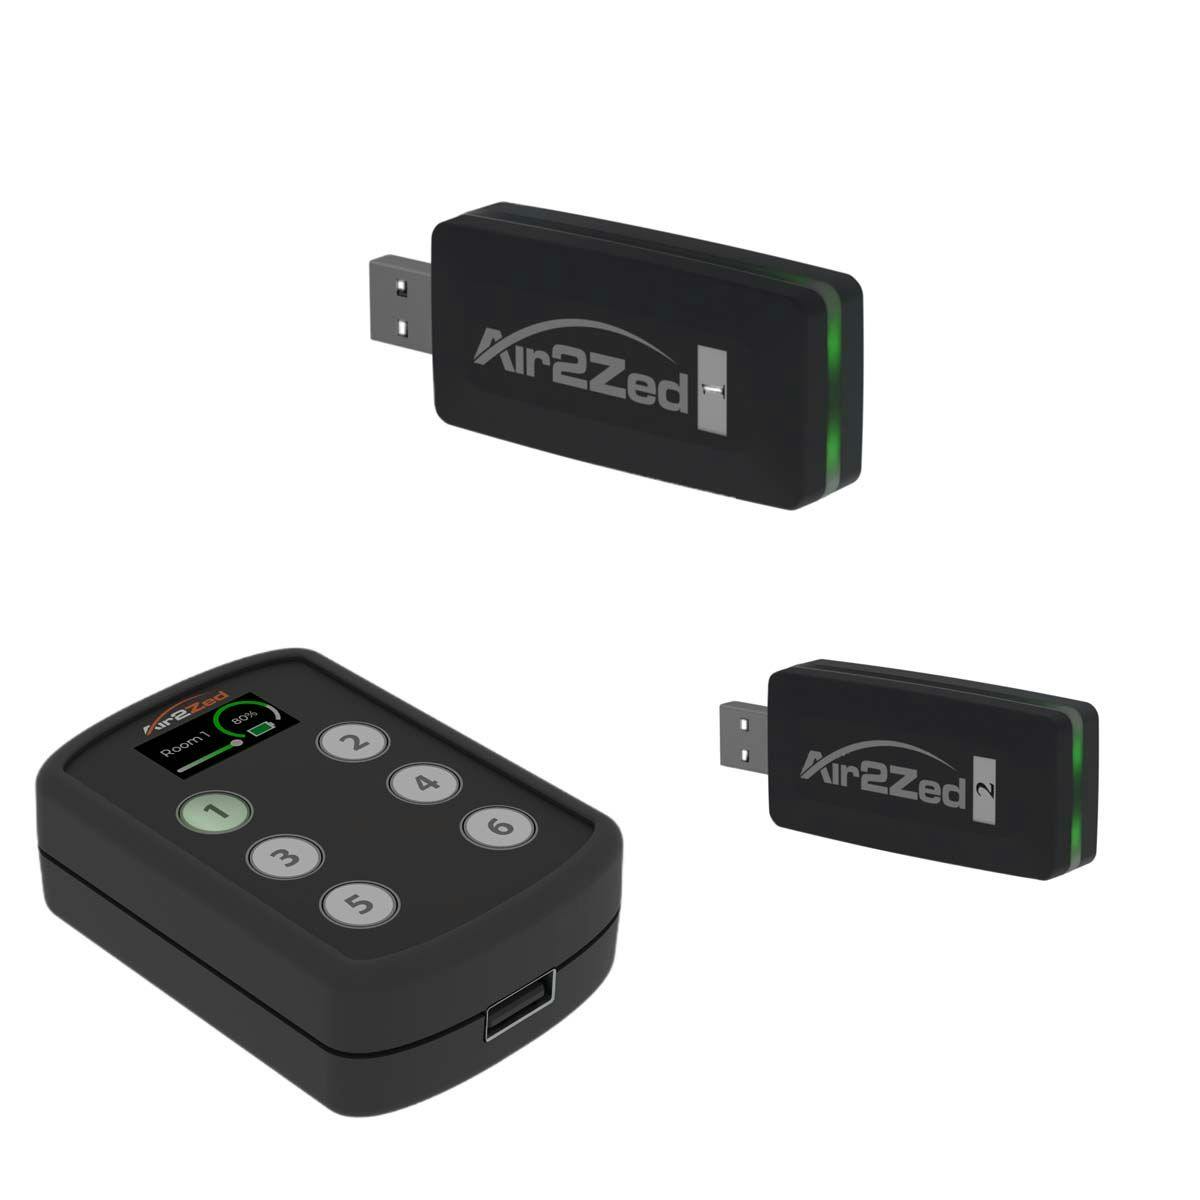 Air2Zed is a simple plug-and-play system that makes your favorite x-ray sensor wireless